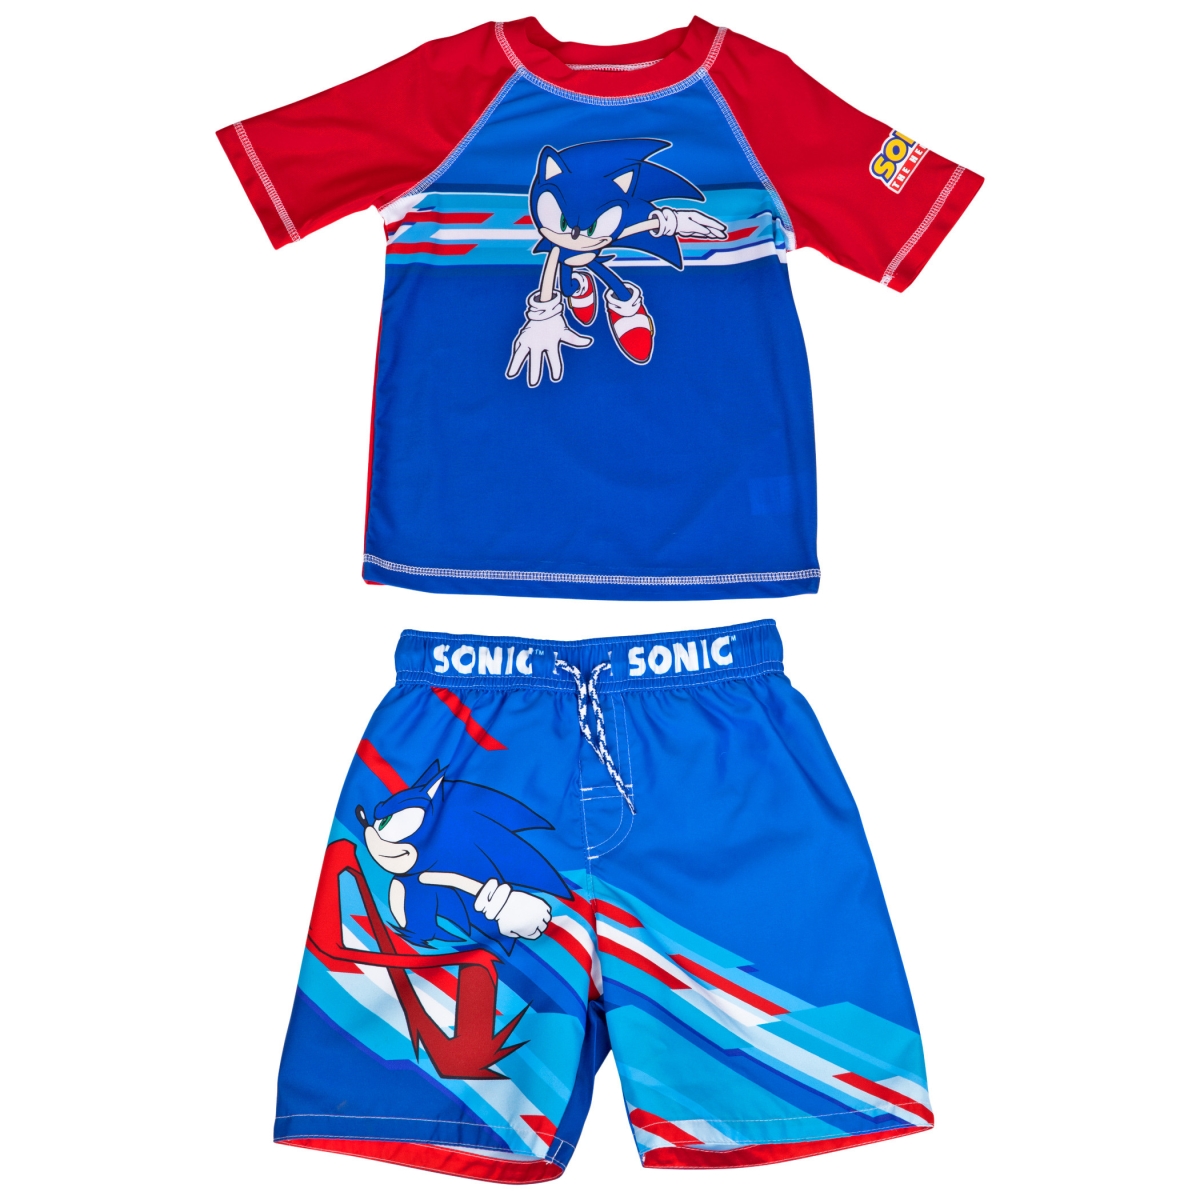 Picture of Sonic 829902-size4 Sonic the Hedgehog Character Youth Swimshorts & Rashguard Set - Size 4